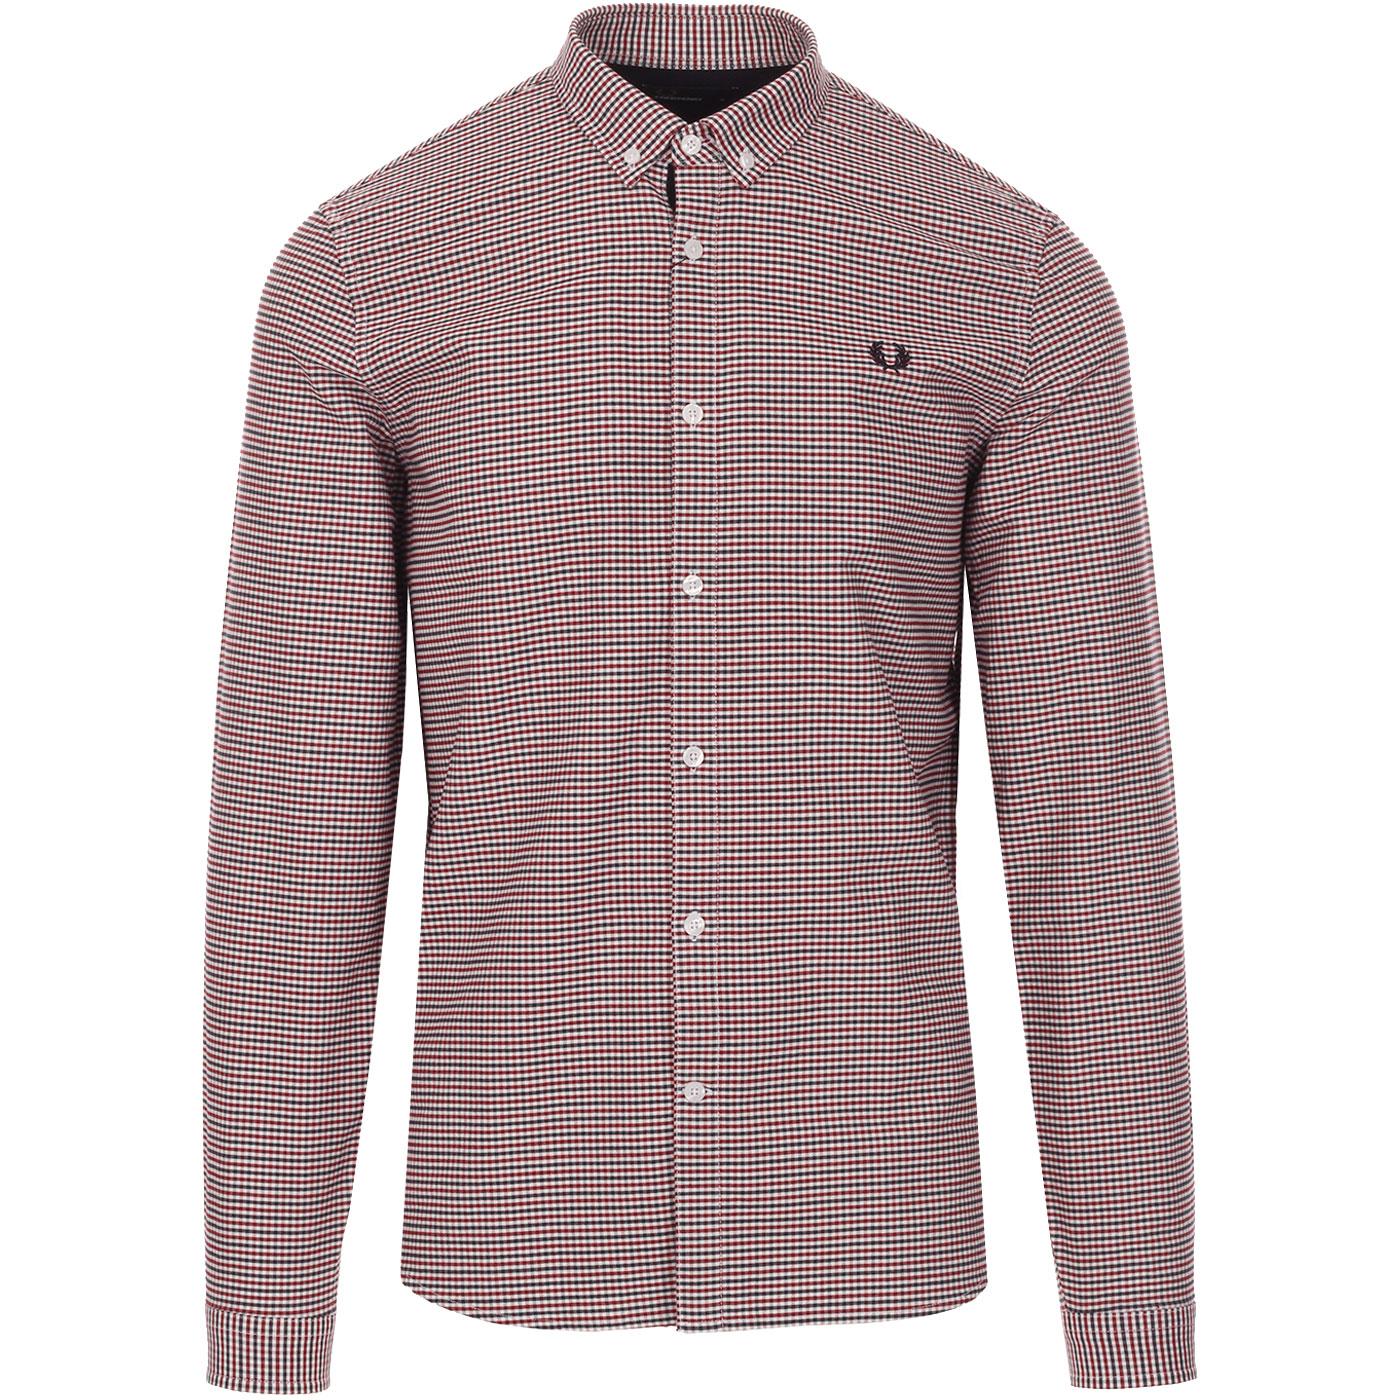 FRED PERRY Men's 3 Colour Gingham Check Shirt DC